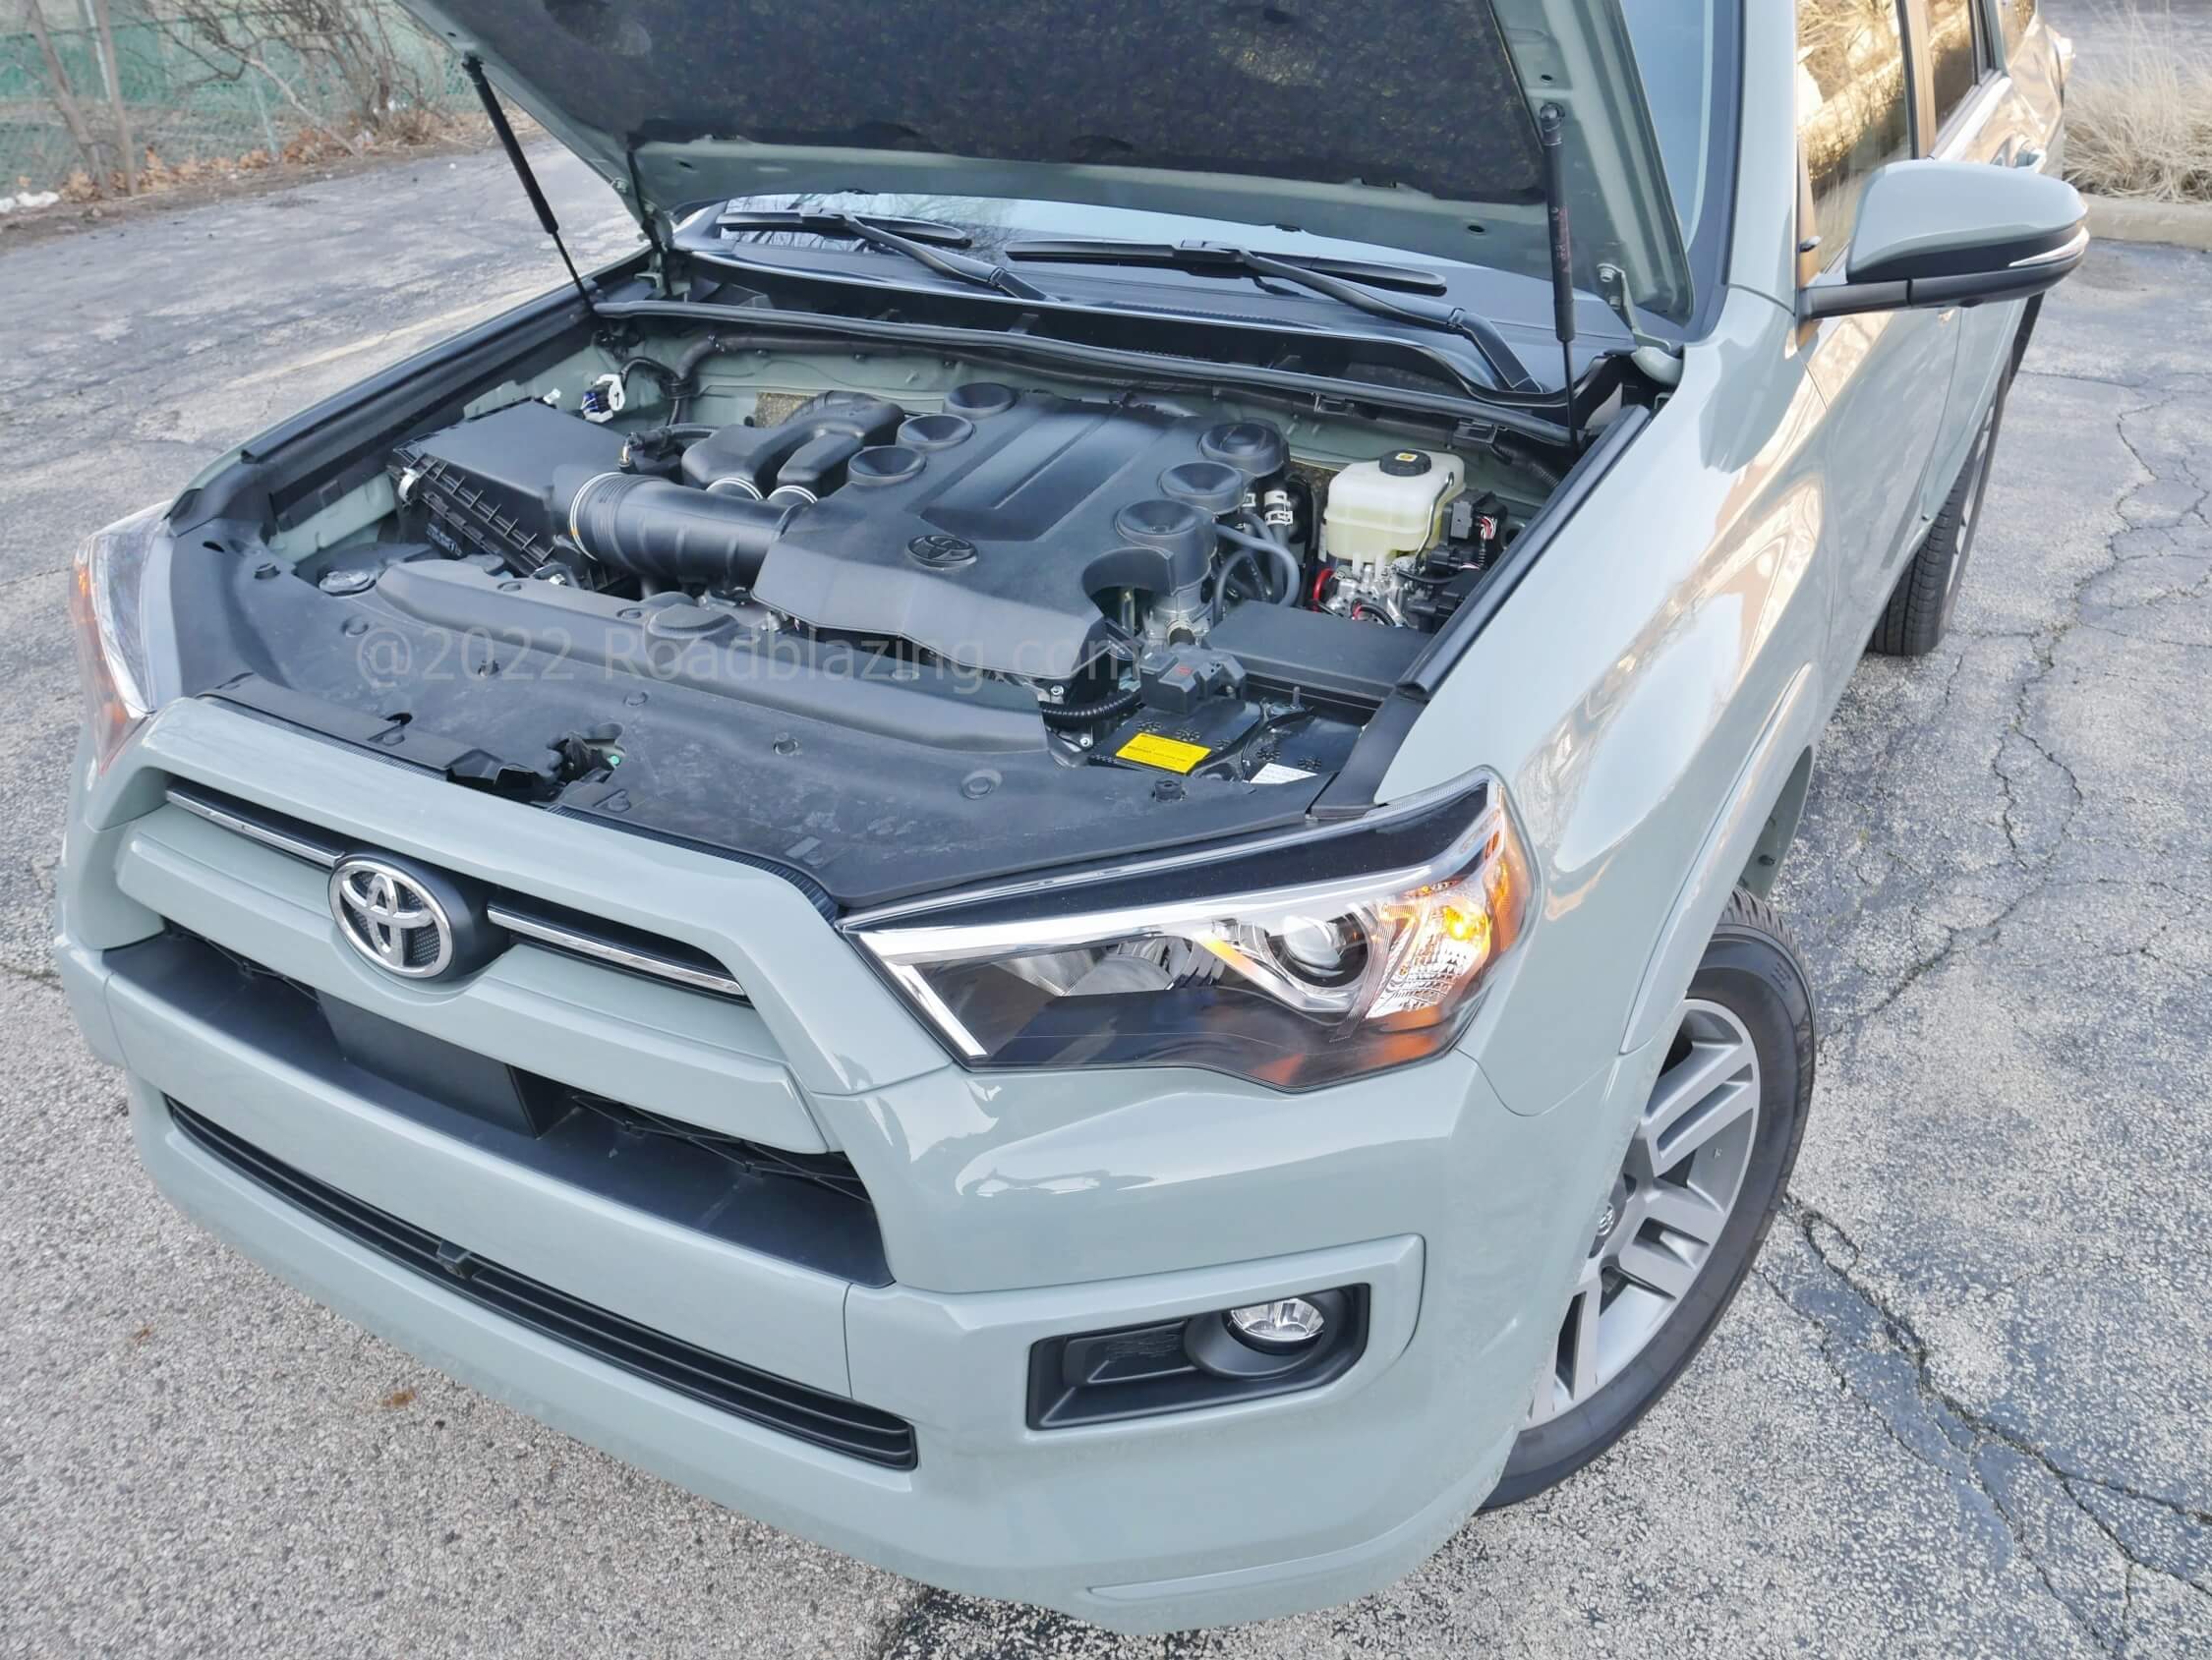 2022 Toyota 4Runner TRD Sport 4x4: twin-cam V-6, making air induction noise, matched to 5-speed automatic and available 2-speed transfer case 4WD, = 16 MPG